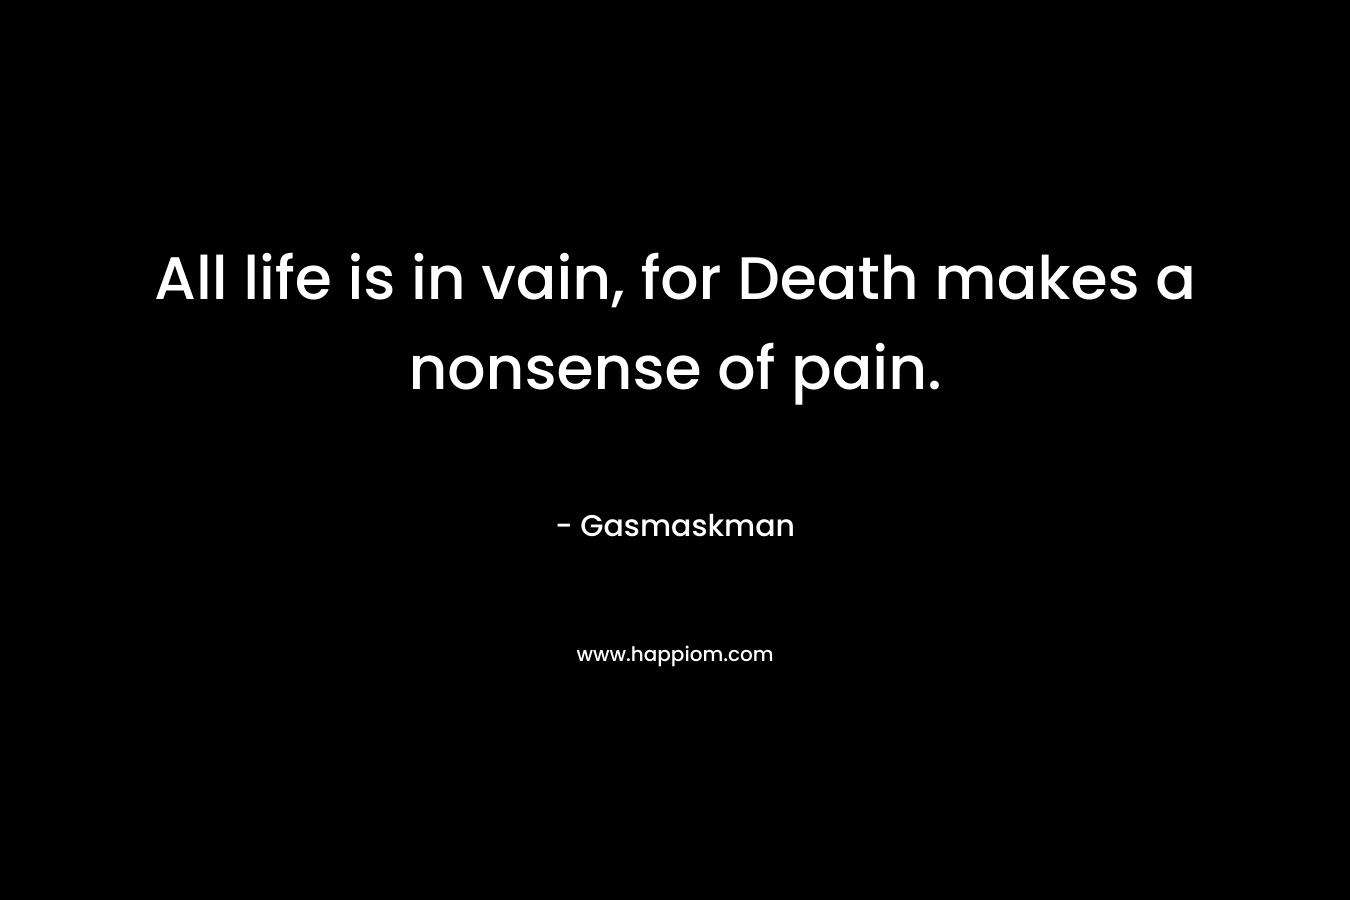 All life is in vain, for Death makes a nonsense of pain. – Gasmaskman